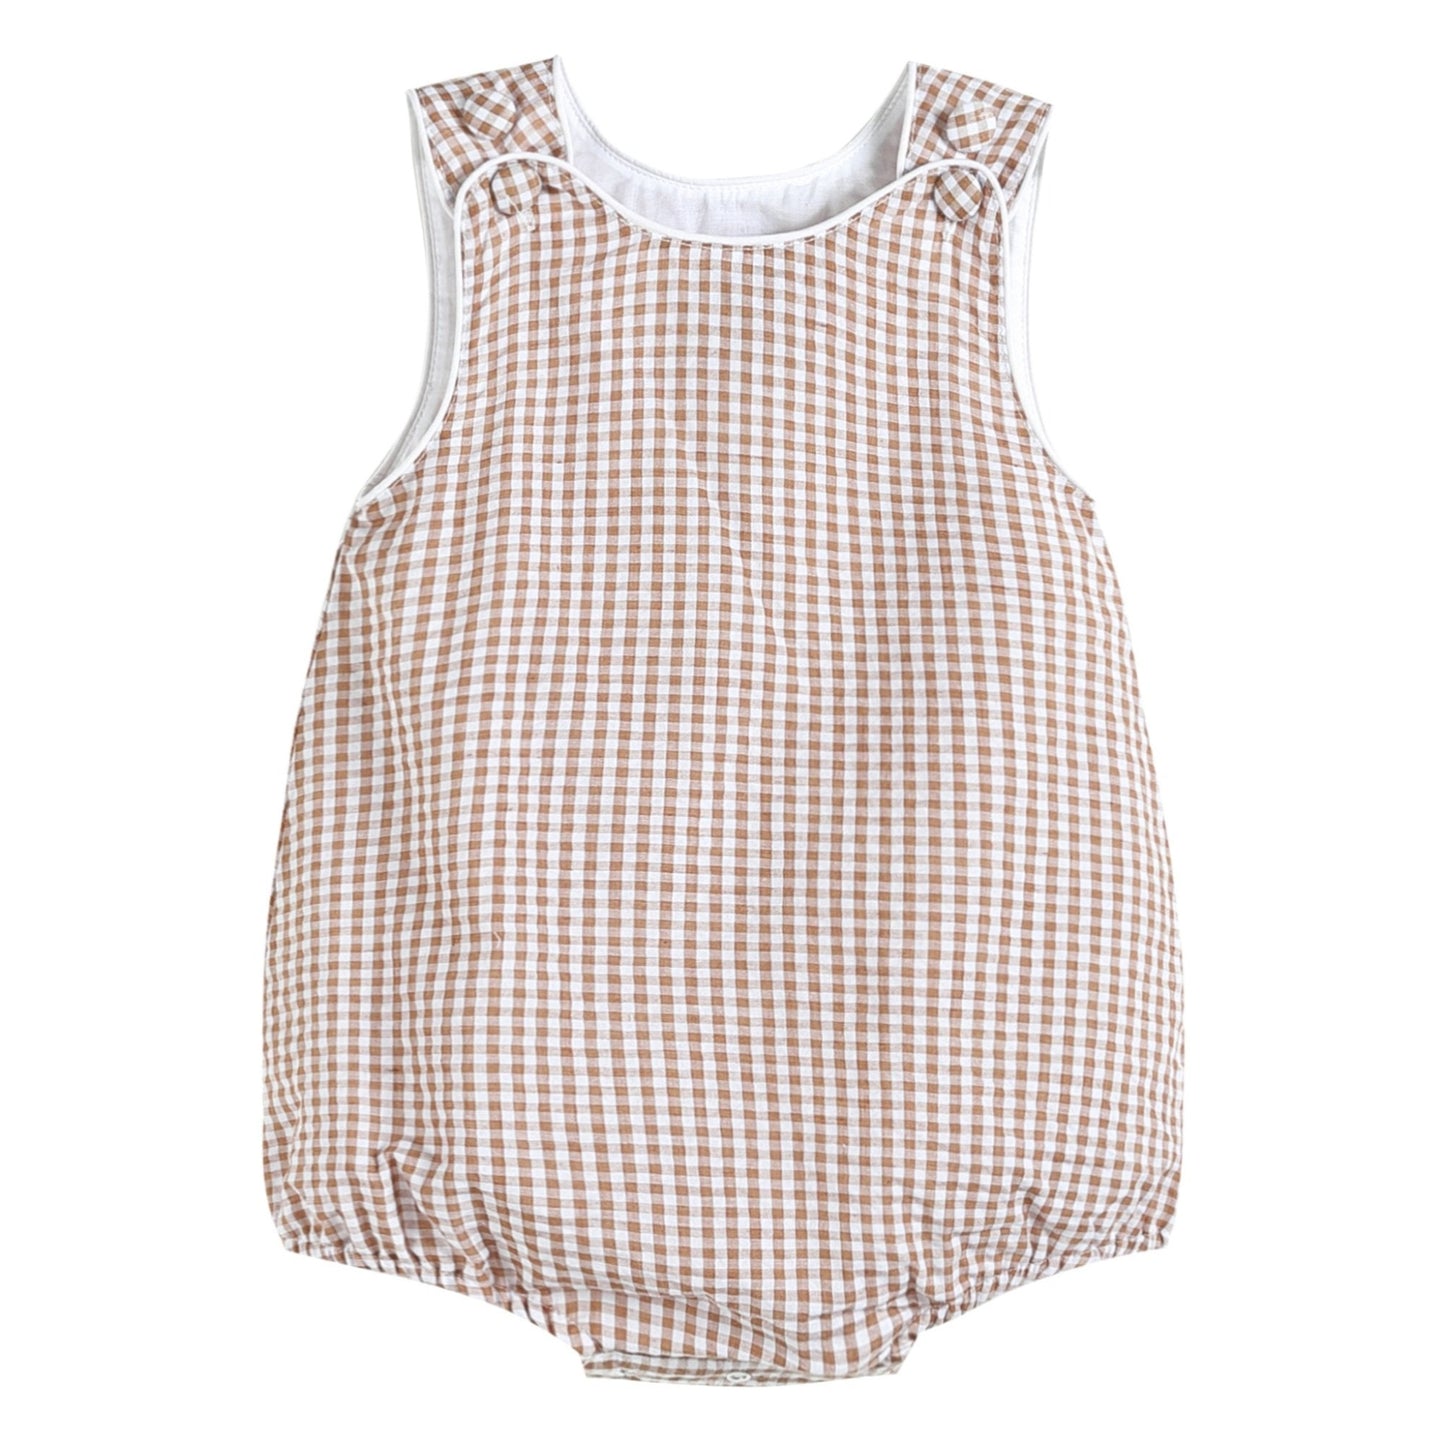 Instant Closet Classic! This comfortable and sweet romper is perfect for everyday fun for your little cutie. Great option for custom embroidery or monogram. Lightweight and soft brown gingham cotton is fully lined. Two adjustable fabric covered buttons and snaps for easy changing. Sizing goes up to 2T. 